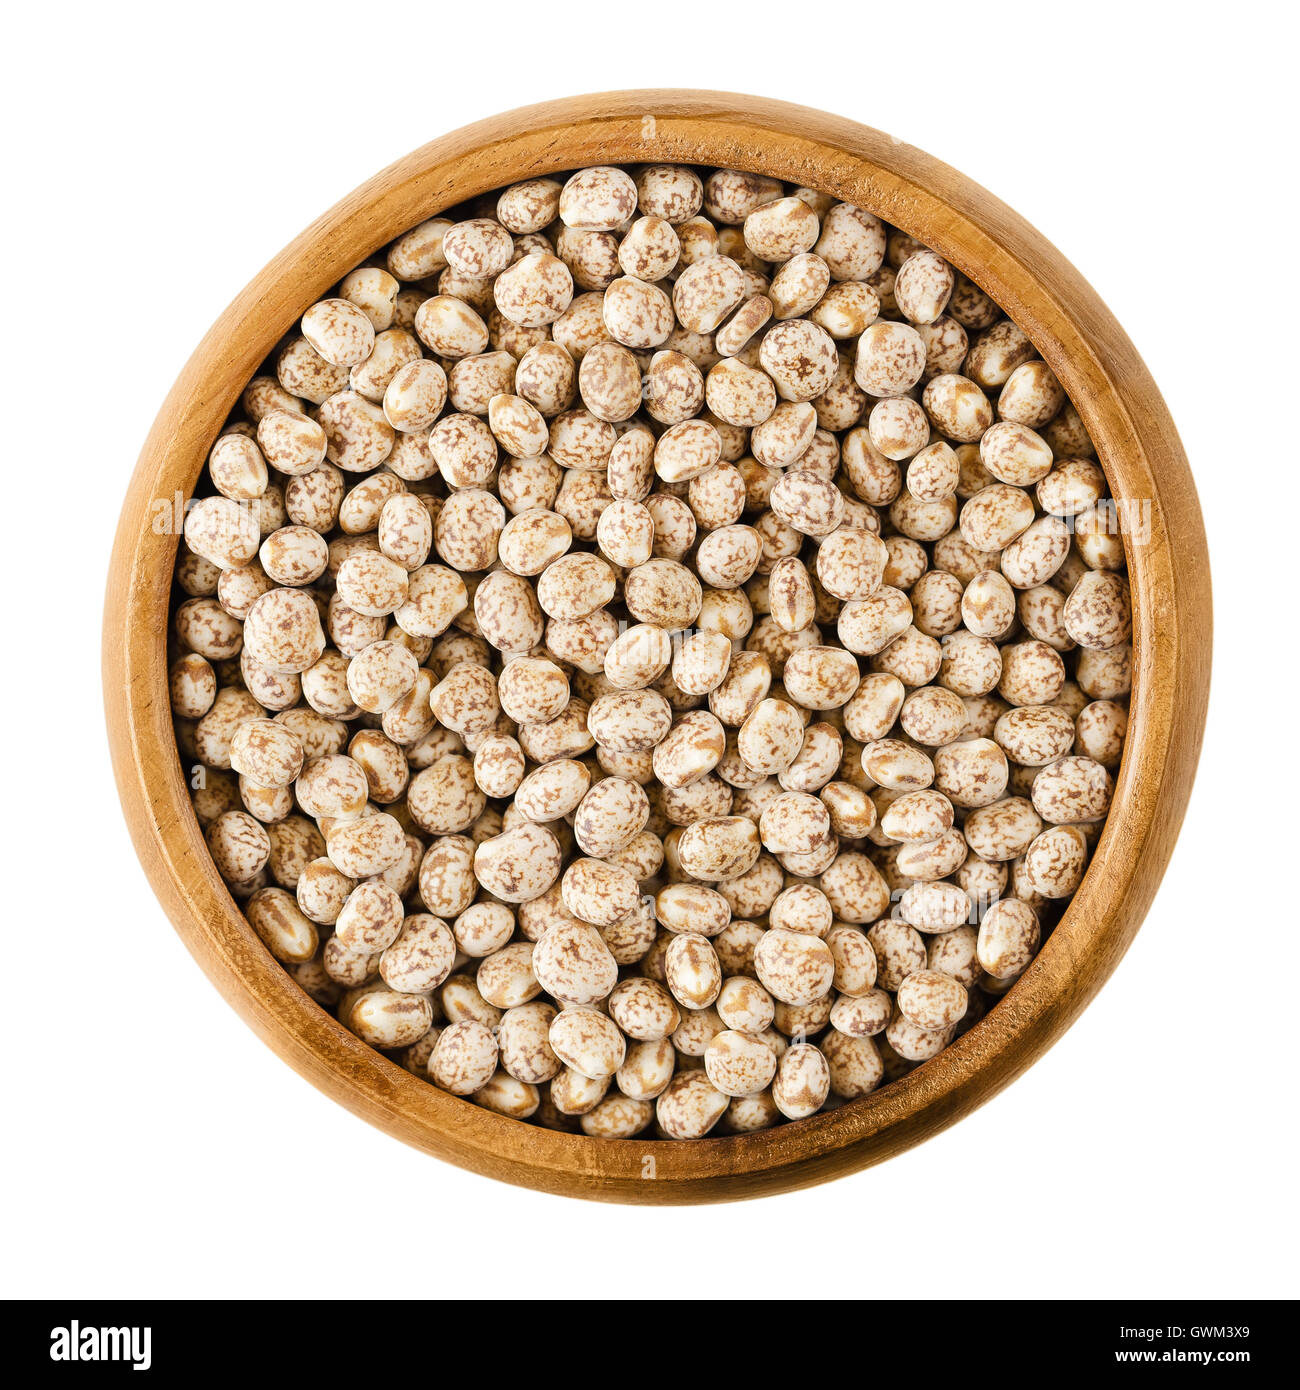 Sweet lupin beans in a wooden bowl on white background, also lupini beans, are the seeds of Lupinum. Edible vegetable. Stock Photo